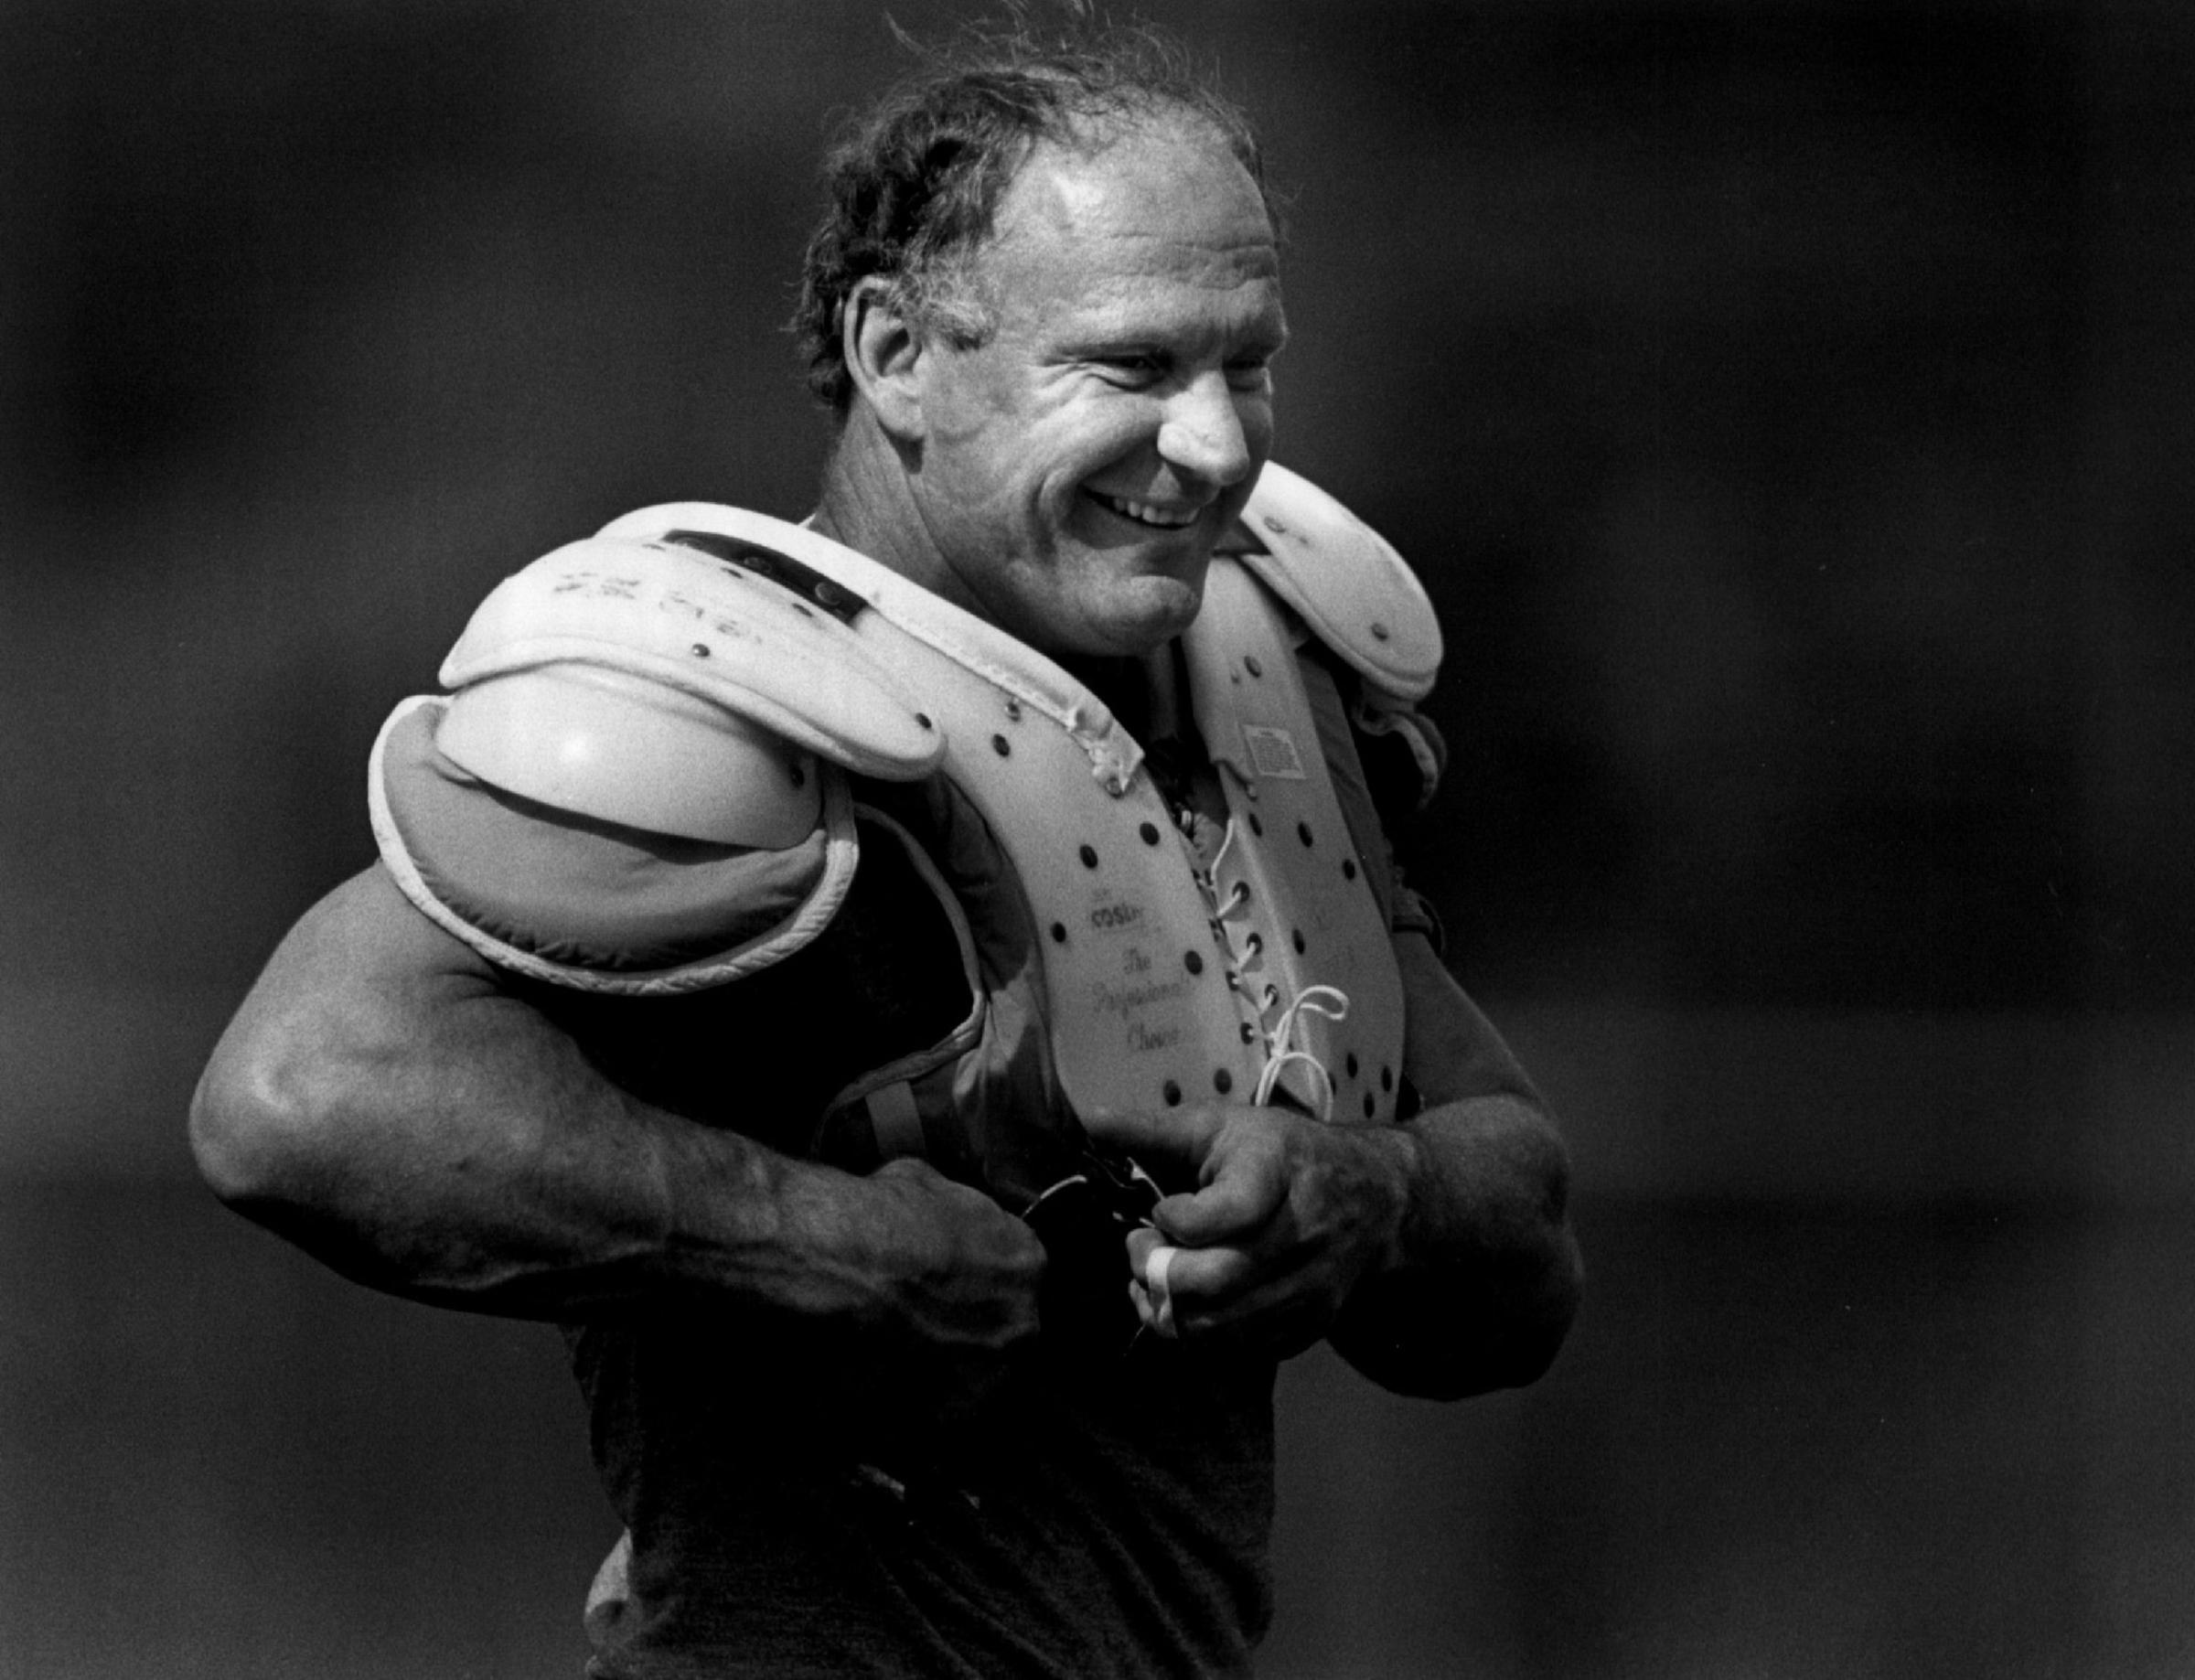 Mike Webster of the Pittsburgh Steelers adjusts his shoulder pads during a practice in Pittsburgh, Pennsylvania, circa 1989.